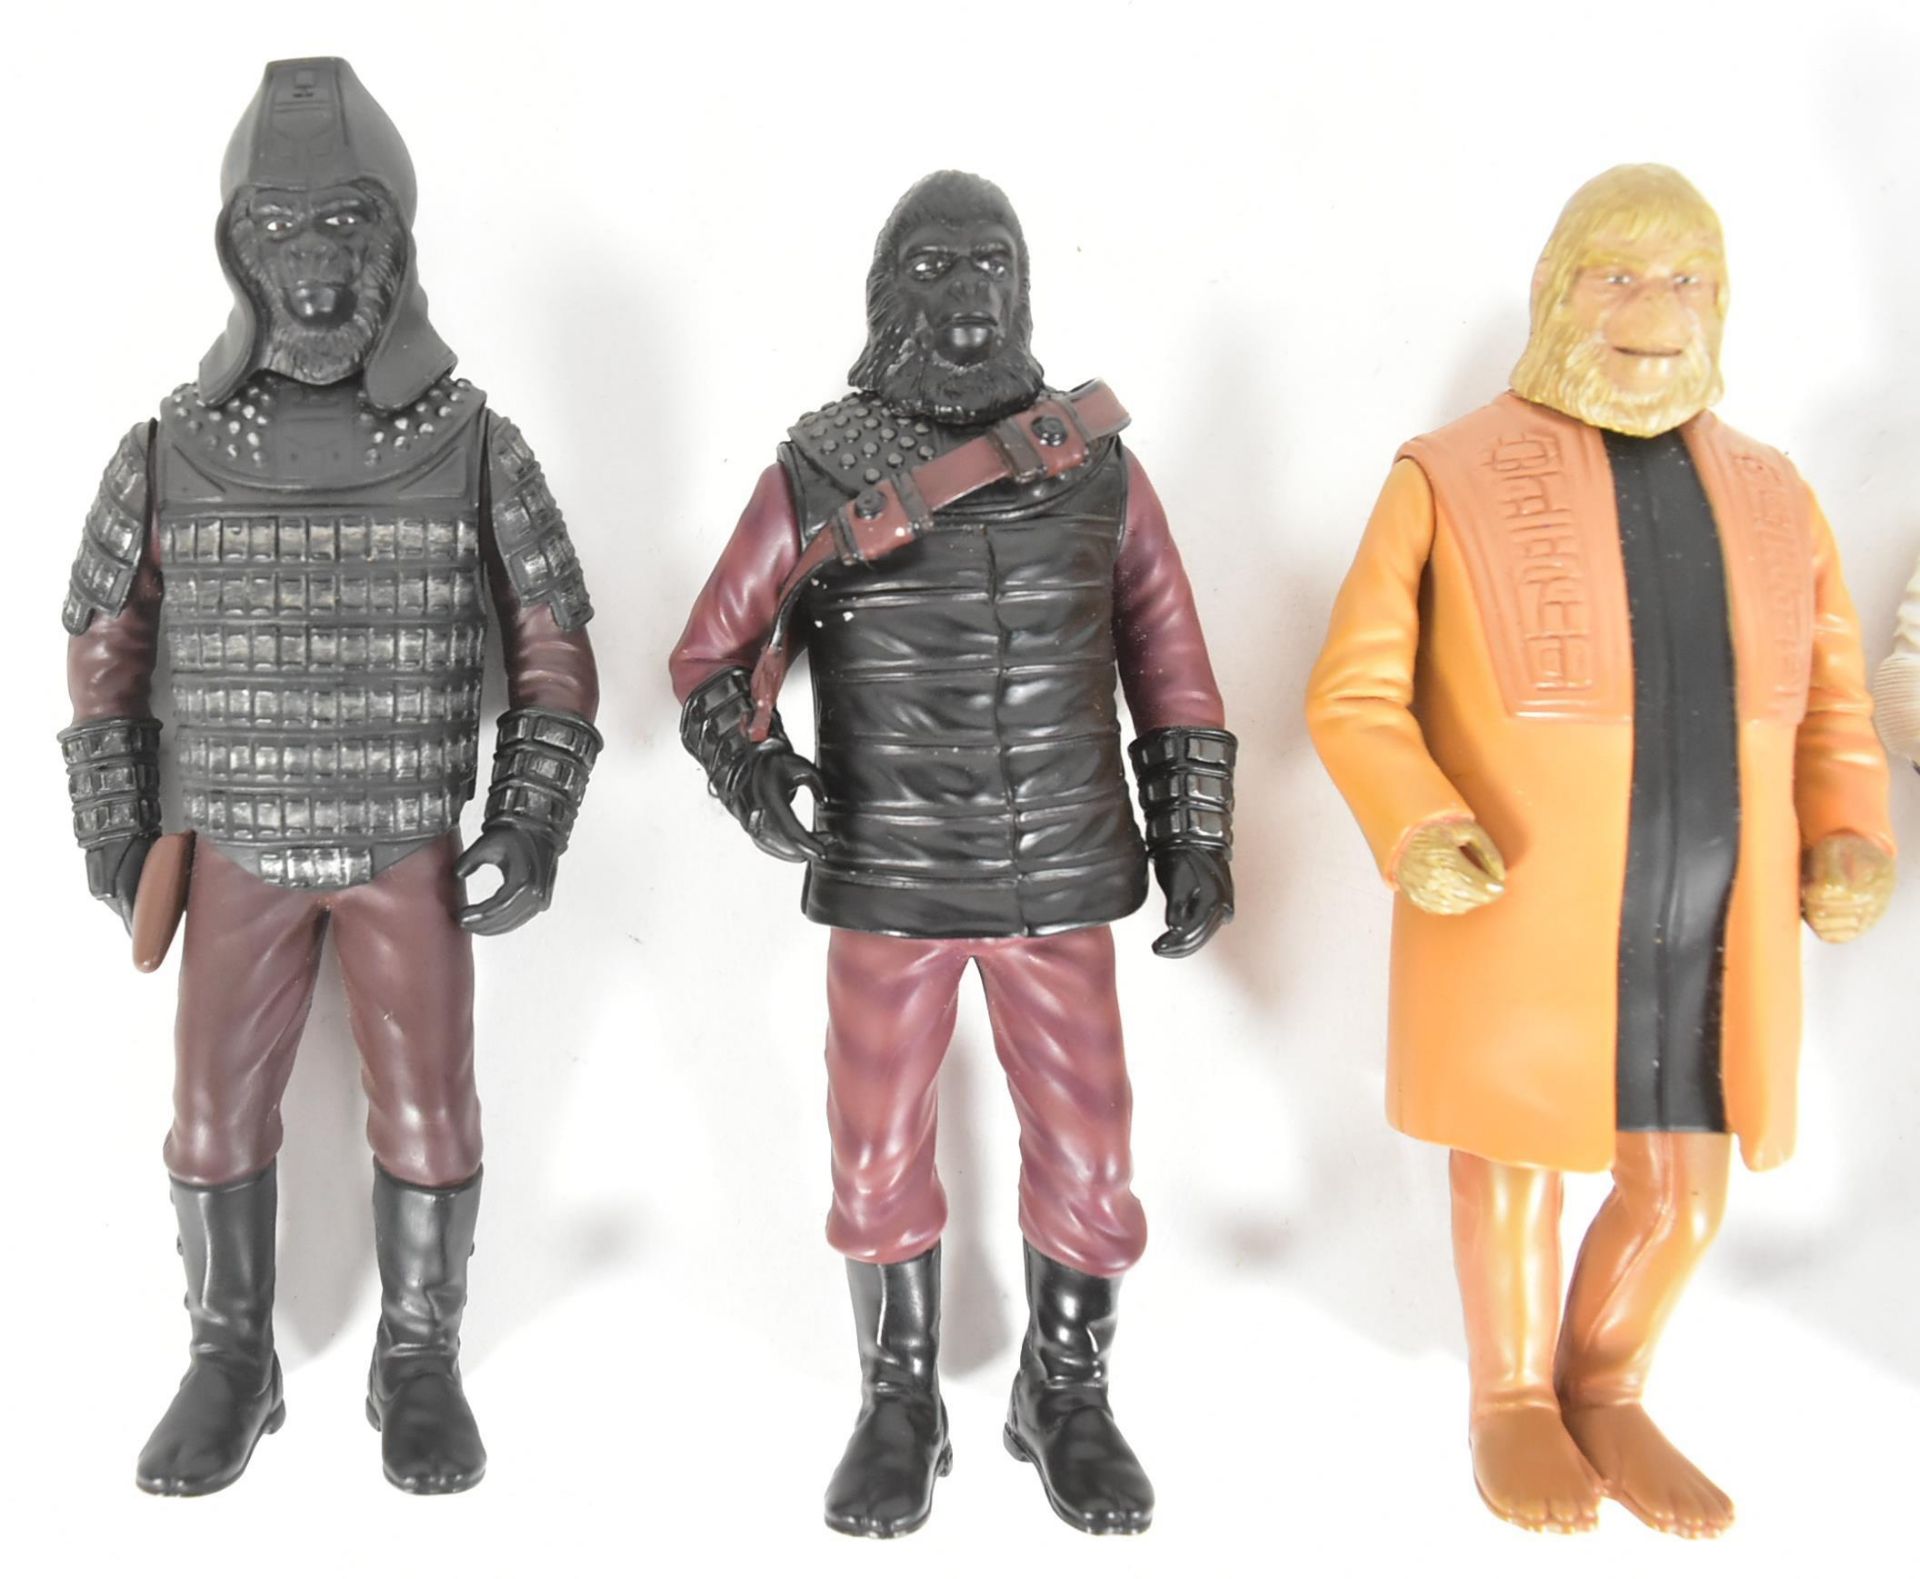 PLANET OF THE APES - MEDICOM - COLLECTION OF ACTION FIGURES - Image 2 of 4